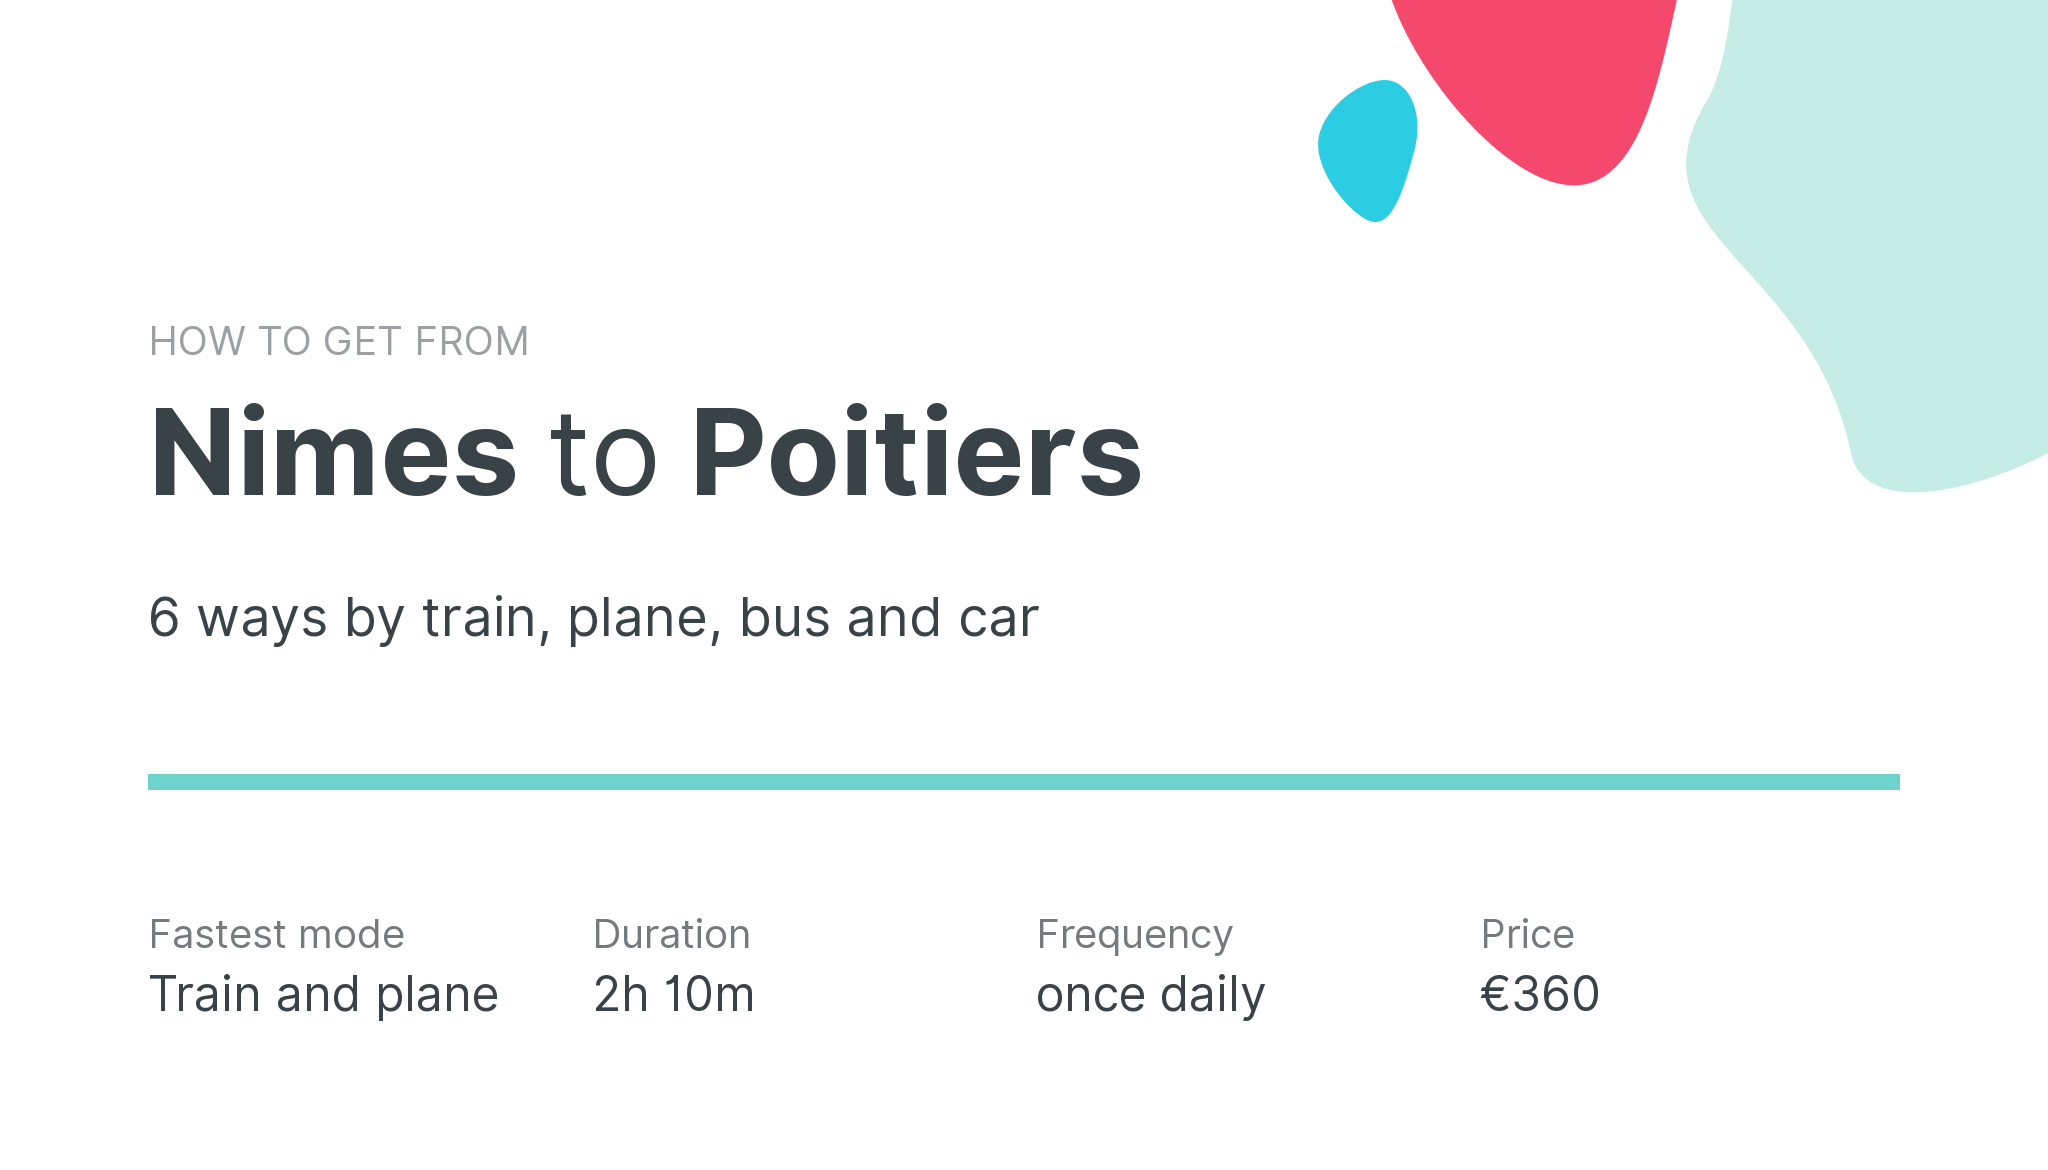 How do I get from Nimes to Poitiers